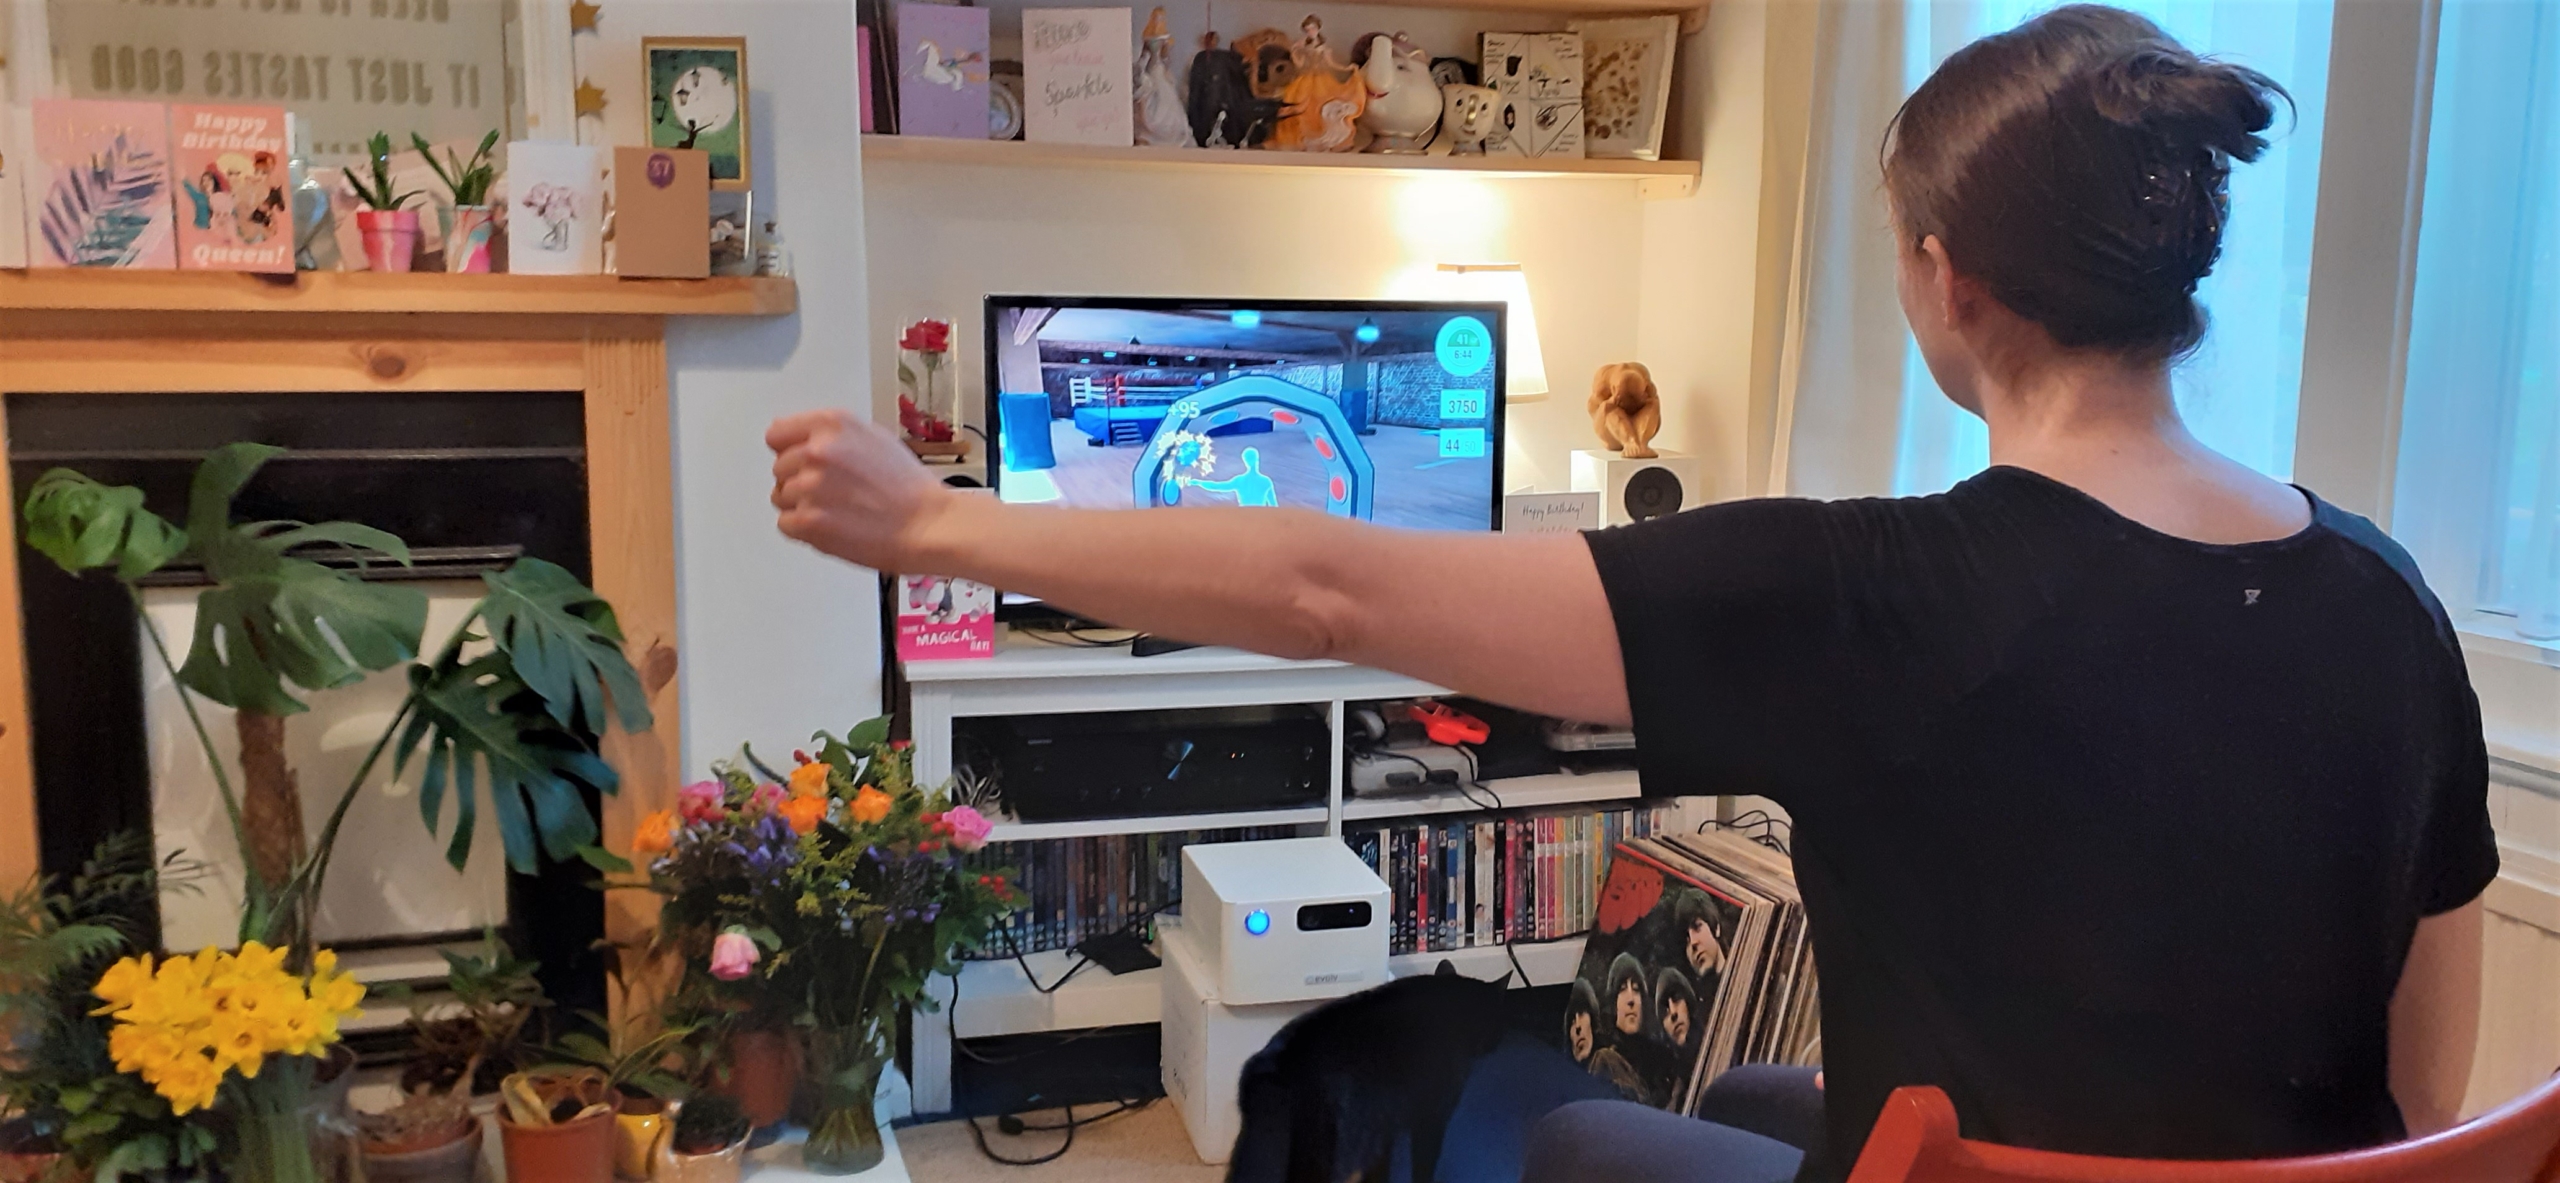 A photo of someone using EvolvRehab on a TV inside their home.